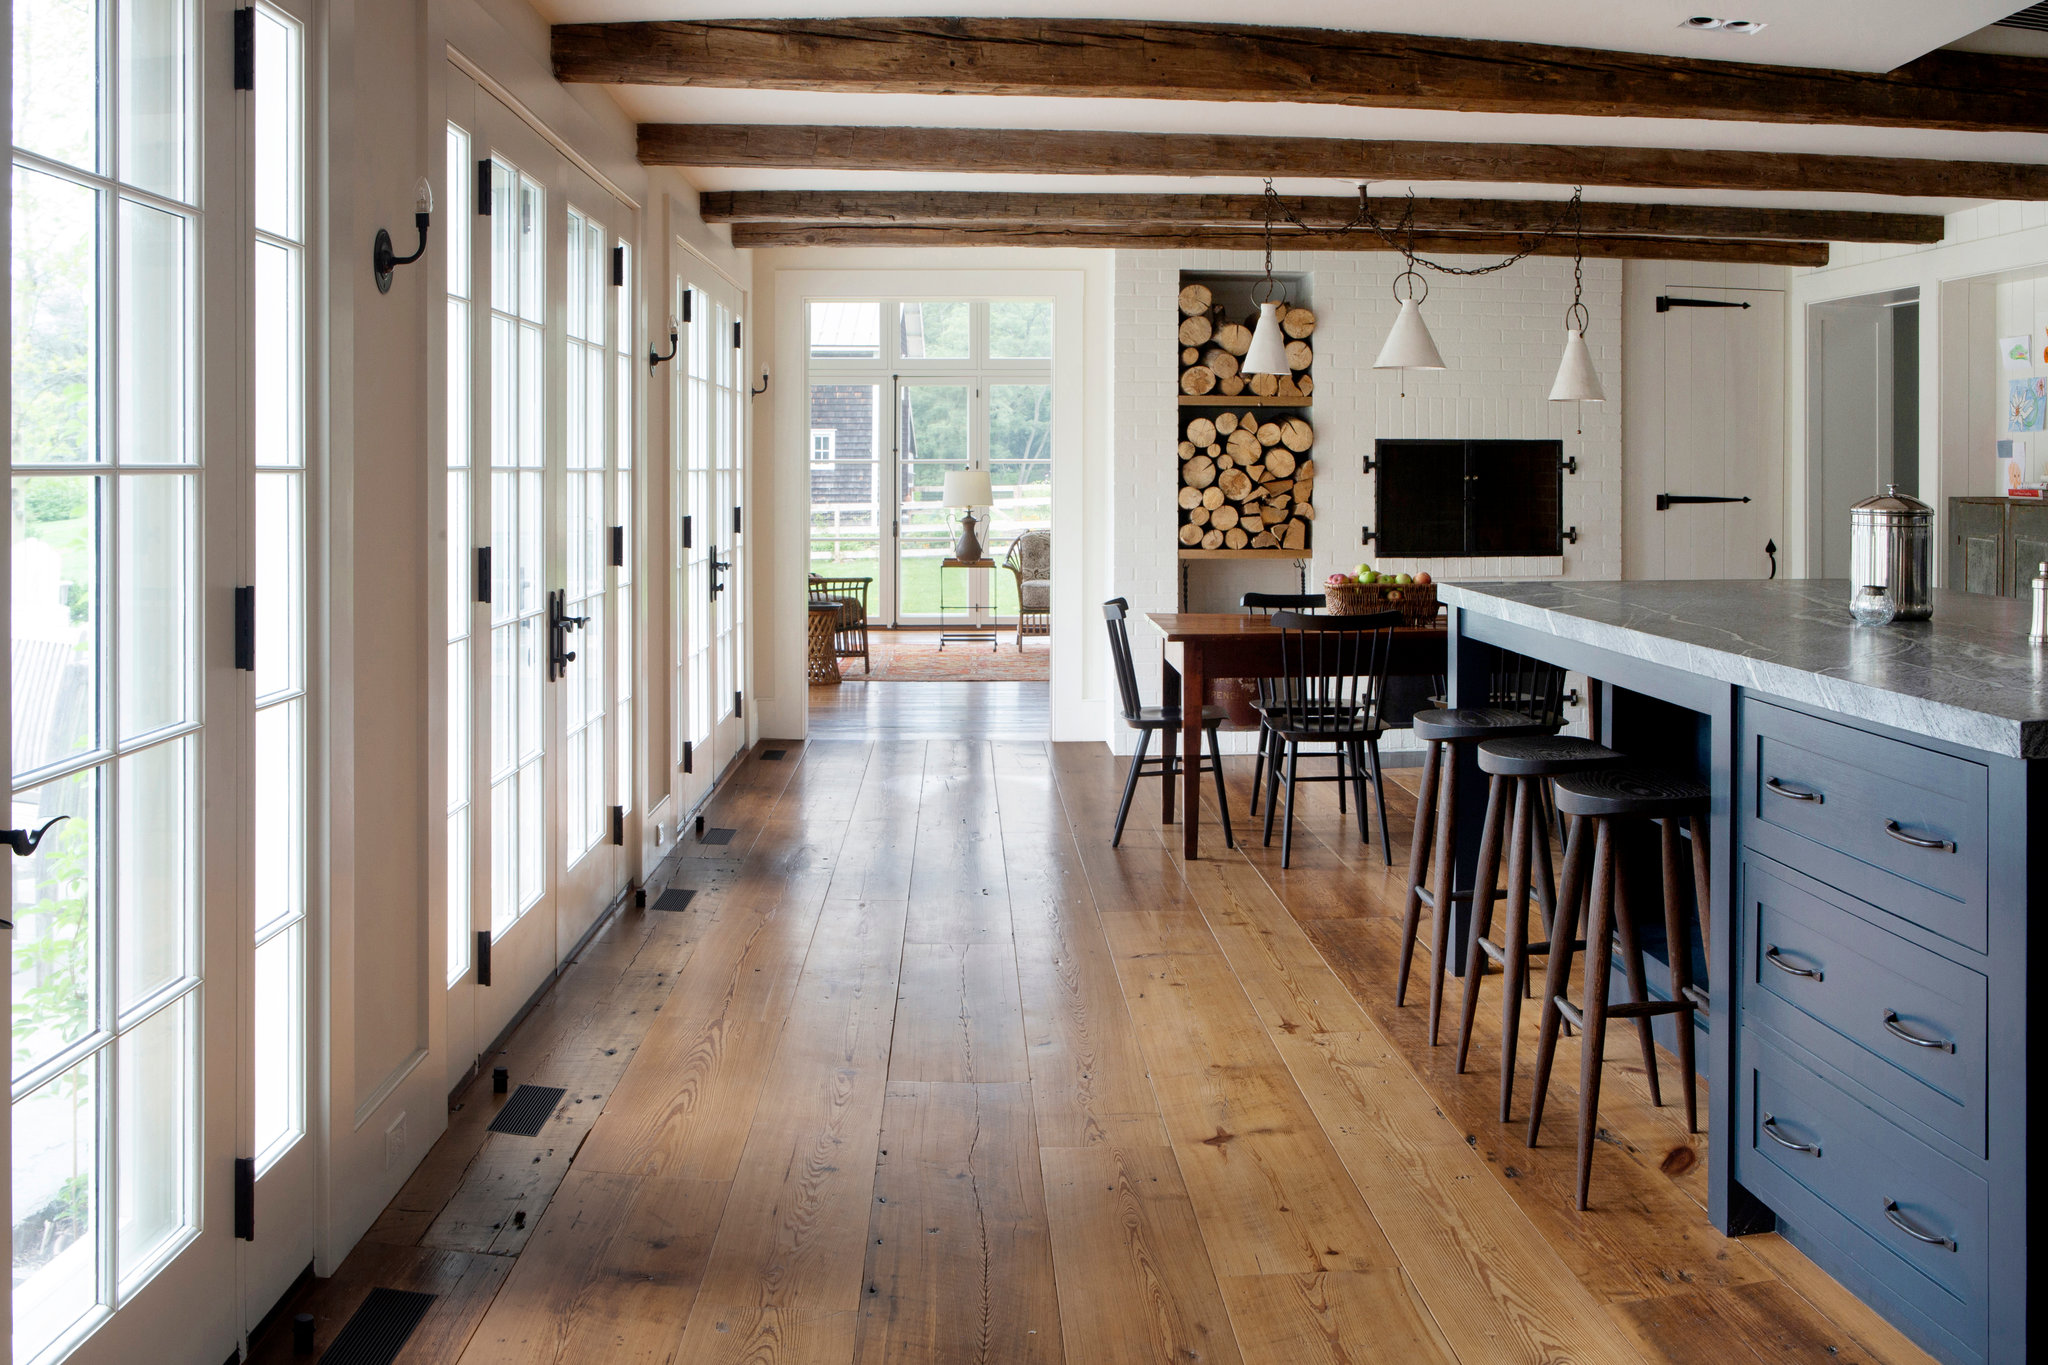 Choosing Beautiful Wooden Floors Isn’t as Complicated as You Might Think